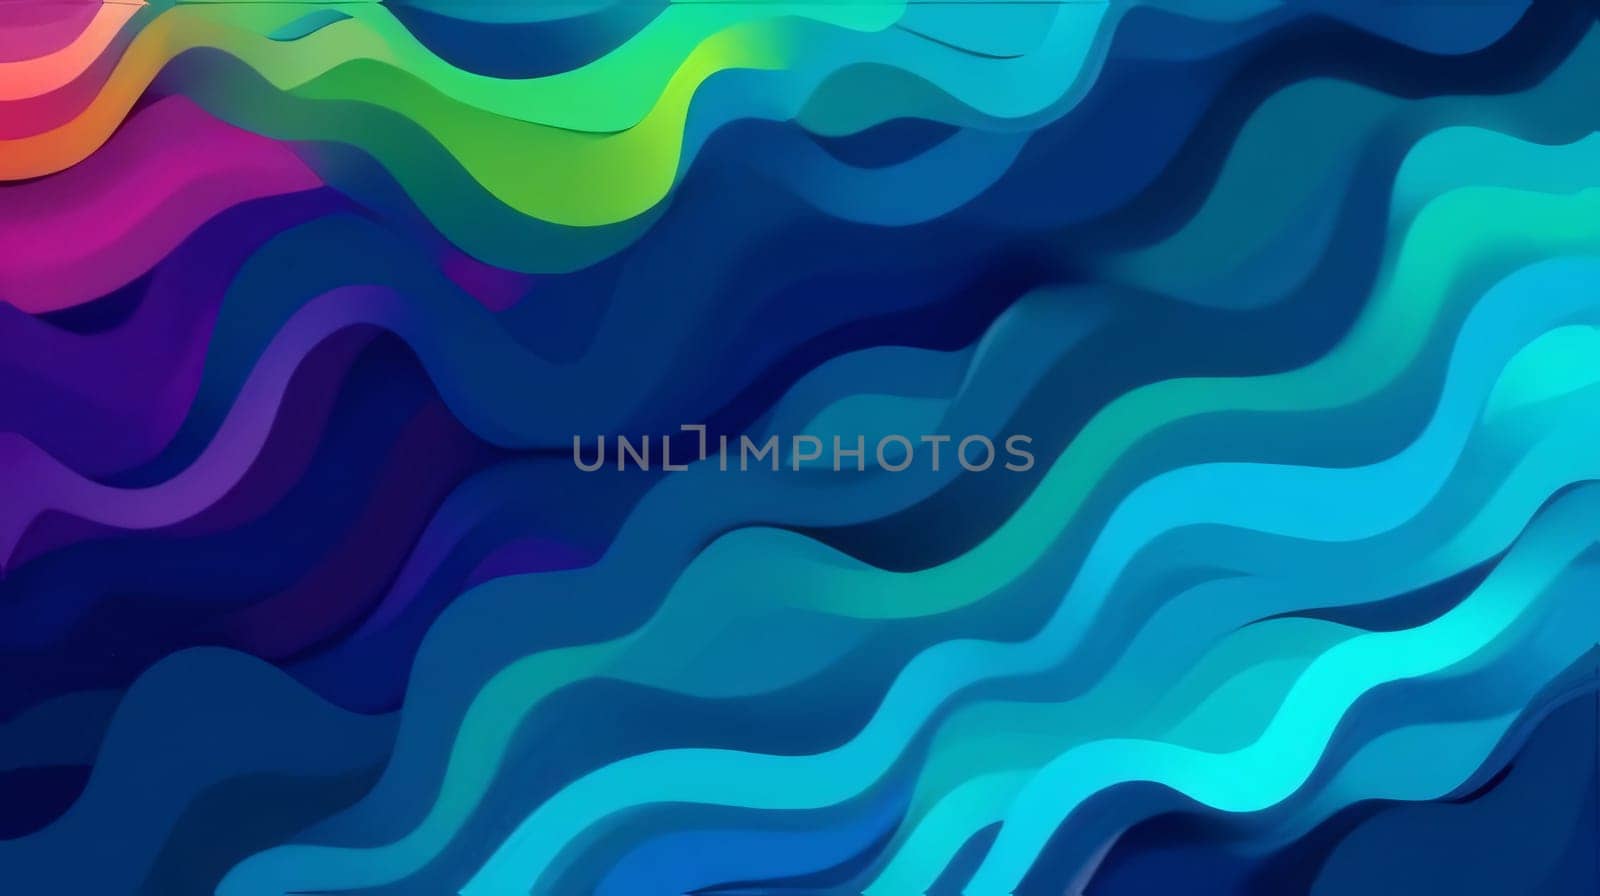 Abstract background design: Abstract wavy background. Colorful vector illustration for your design.